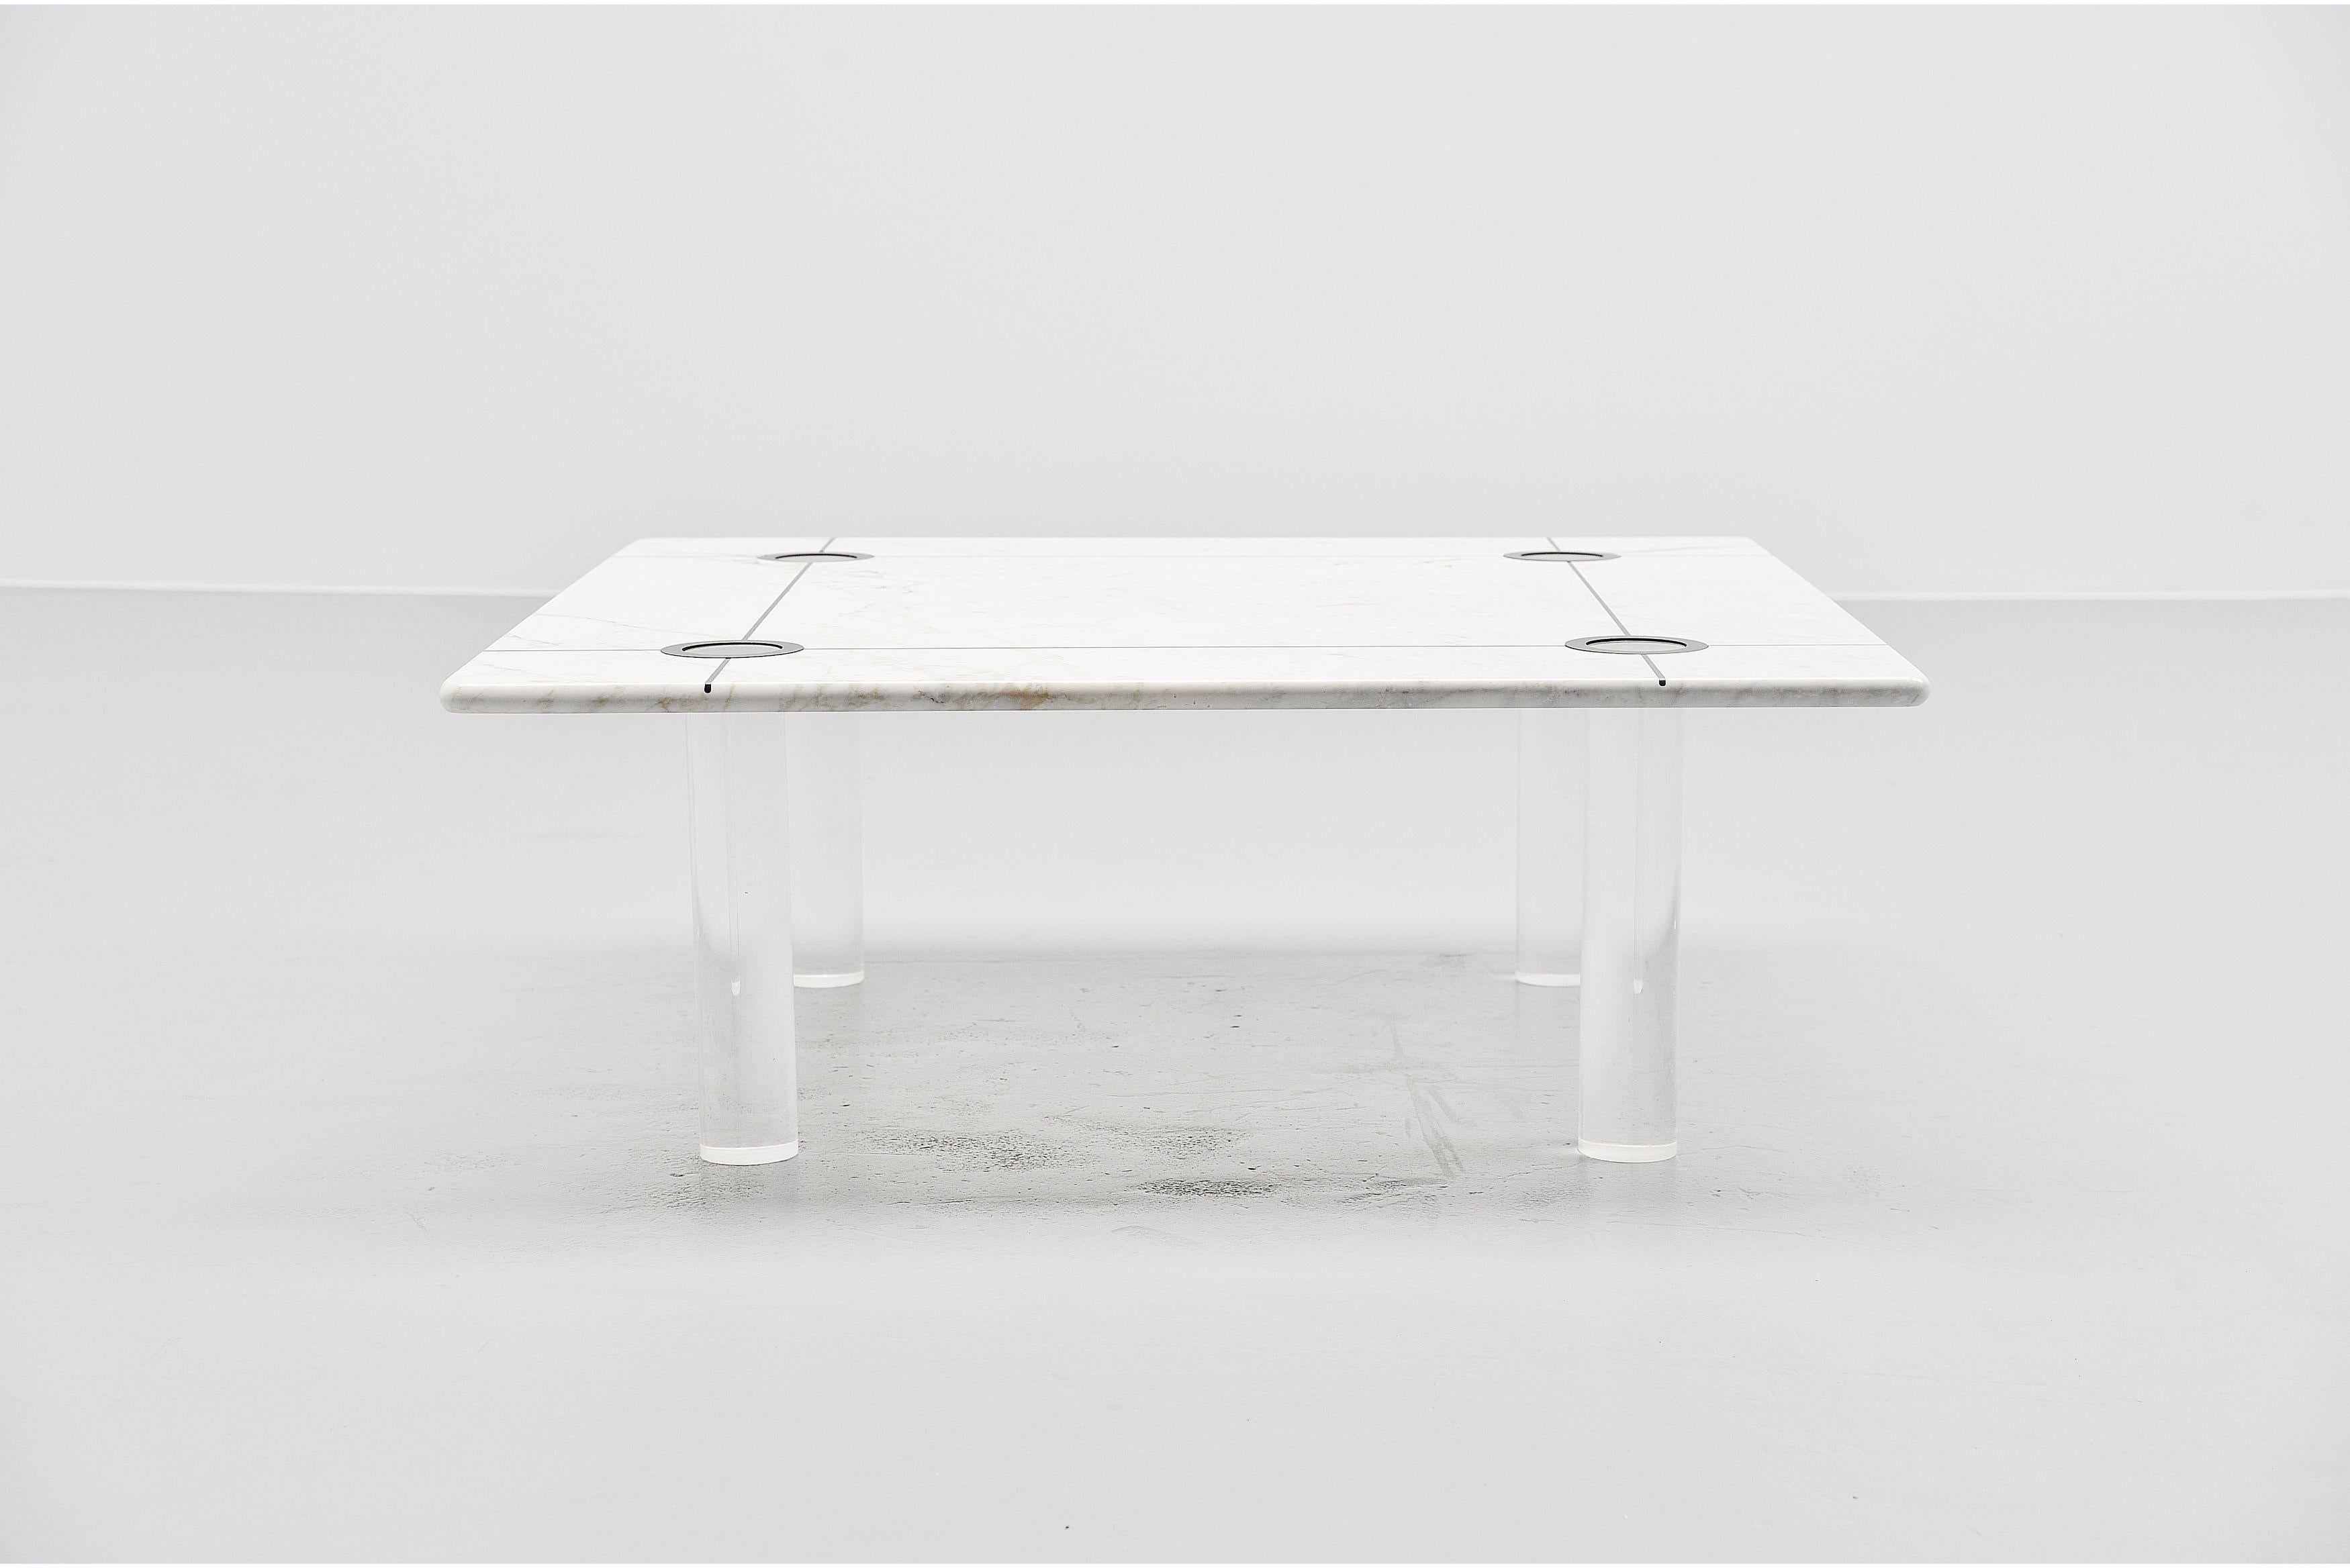 Super shaped high quality square coffee table, attributed to Romeo Rega, Italy, 1970. This coffee table has a fantastic white marble square top with black inlayed stone stripes. The marble has beautiful grey and green veins which makes marble such